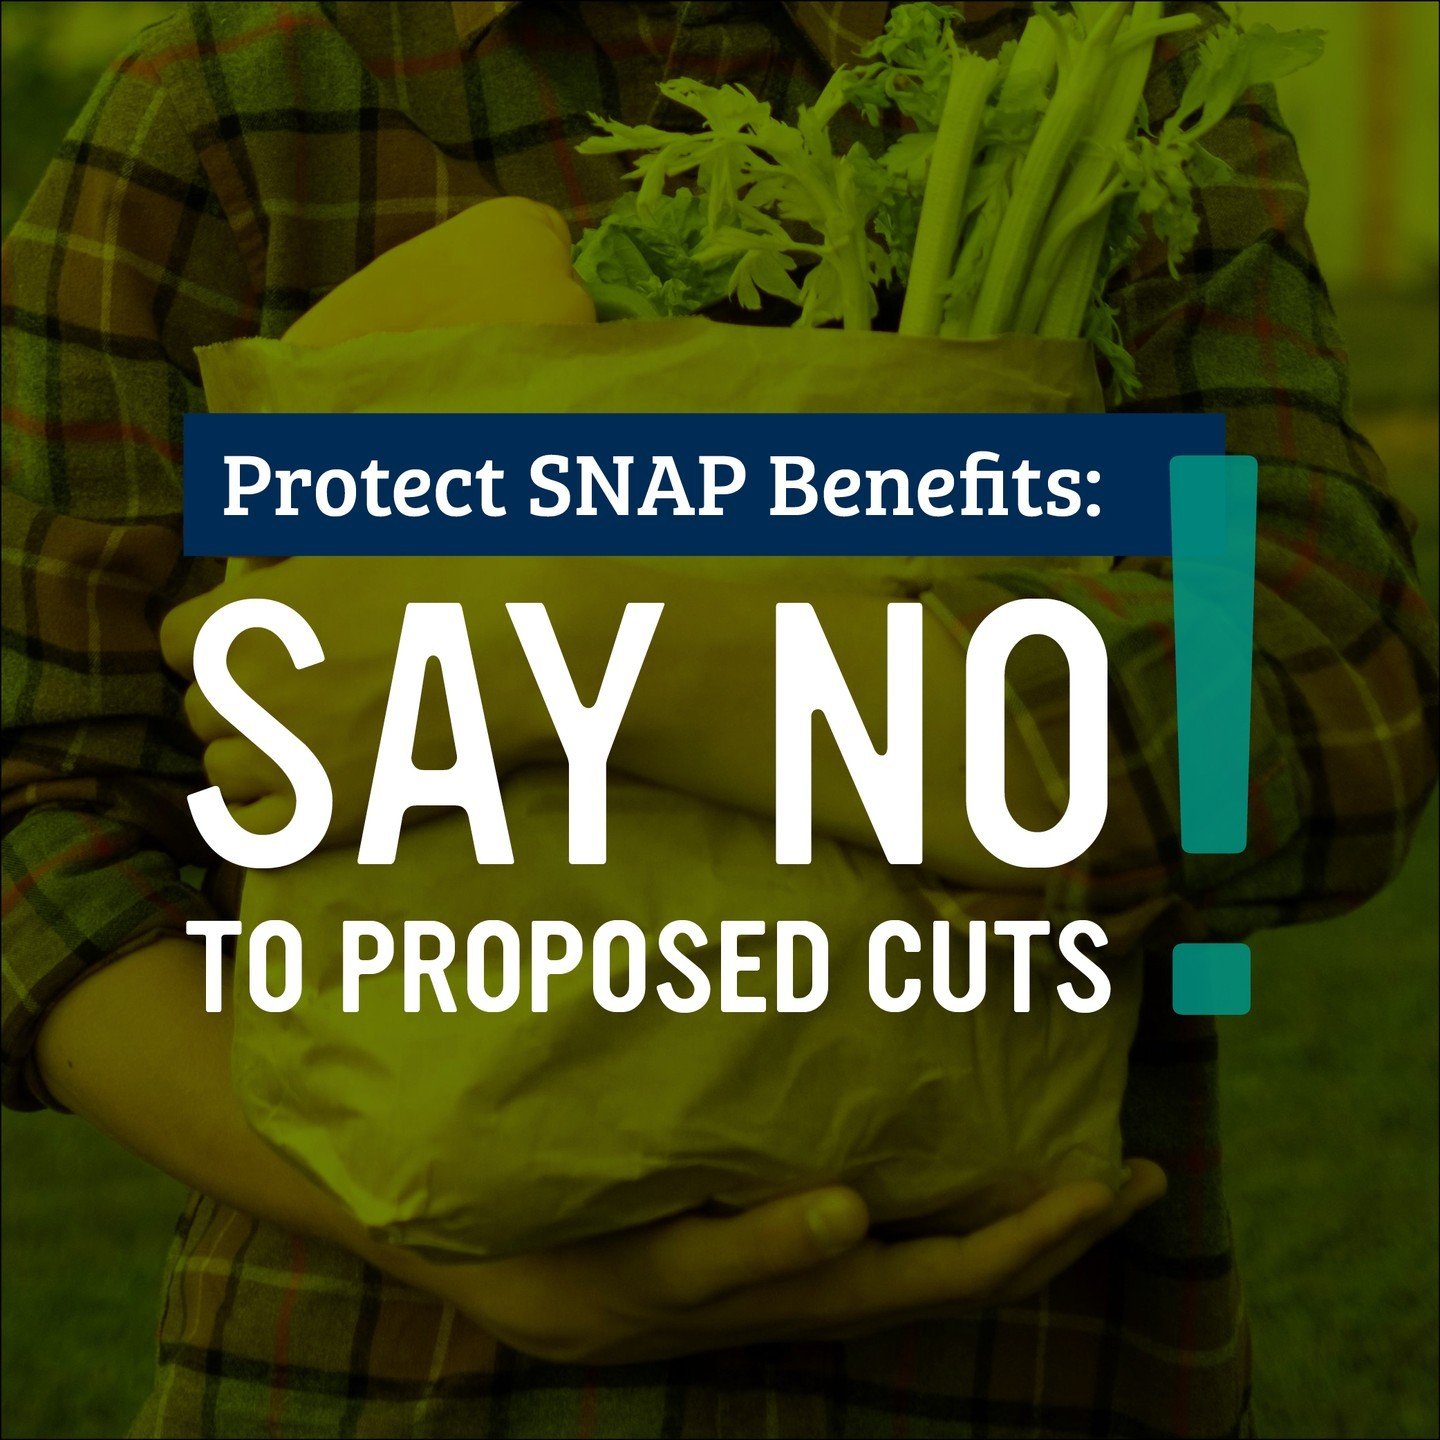 🚨 Urgent Action Needed! 🚨 SNAP (known in VT as 3SquaresVT) benefits are under threat again. Proposals from the House Ag. Committee could cut funding by $30 billion, impacting millions of families. Join us in protecting SNAP. Learn more and take act